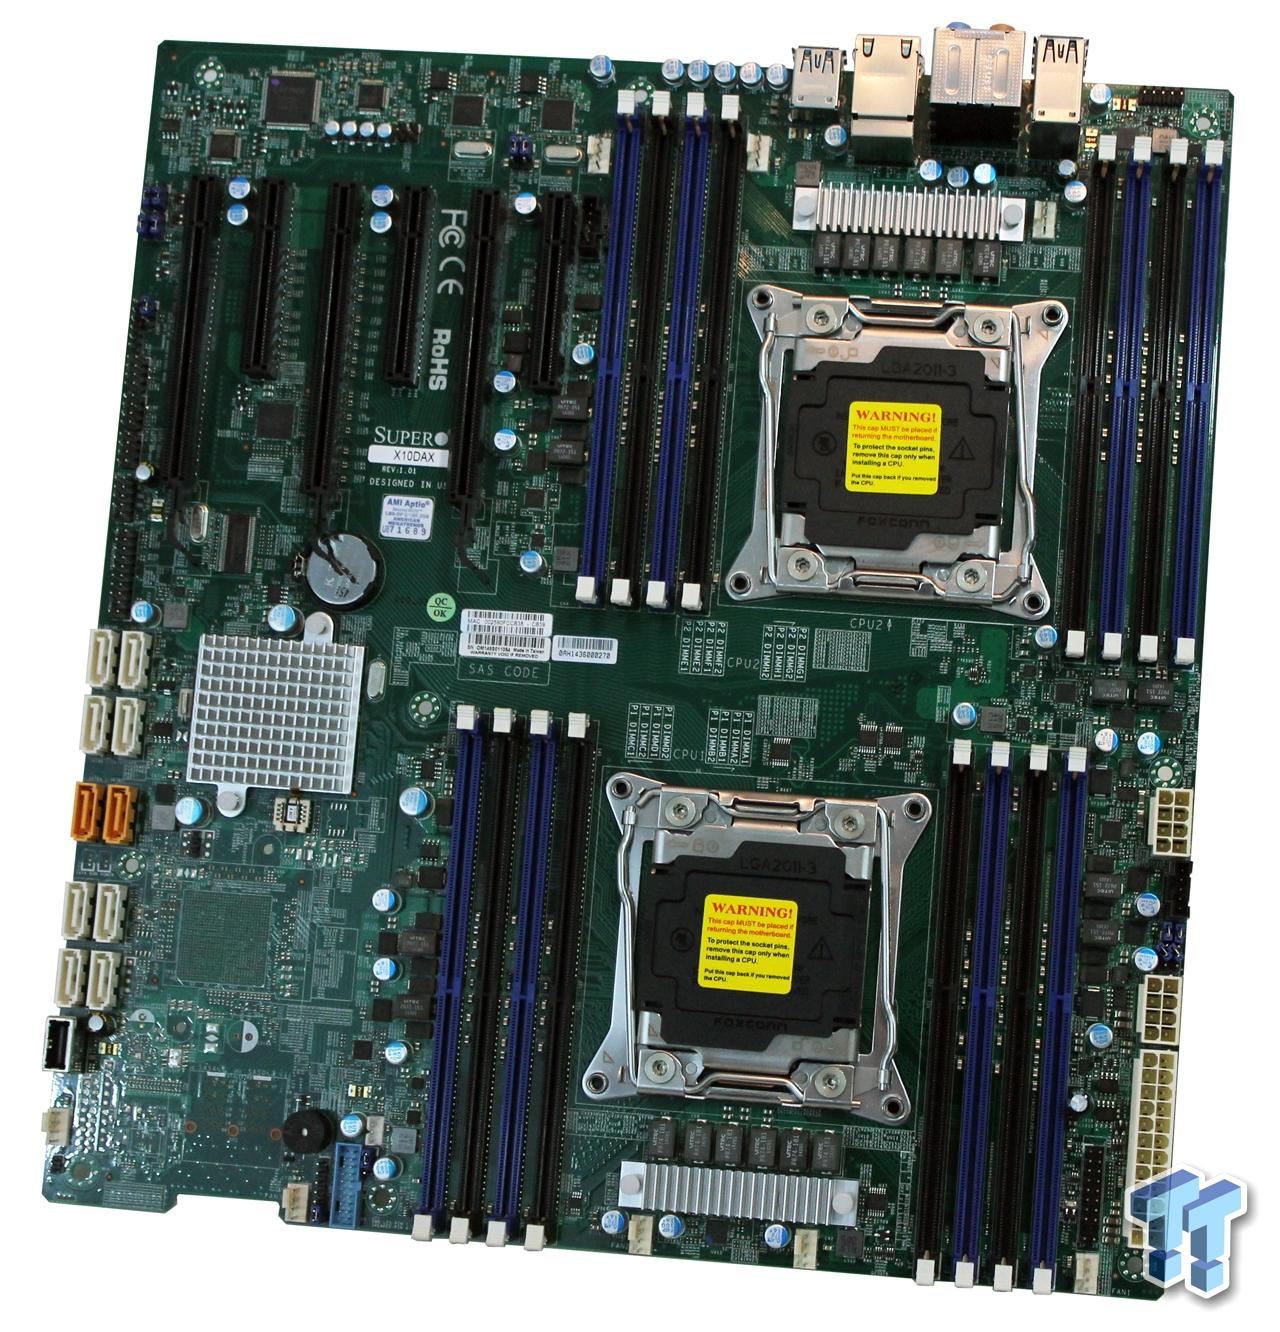 Supermicro X10DAX (Intel C612) Workstation Motherboard Review